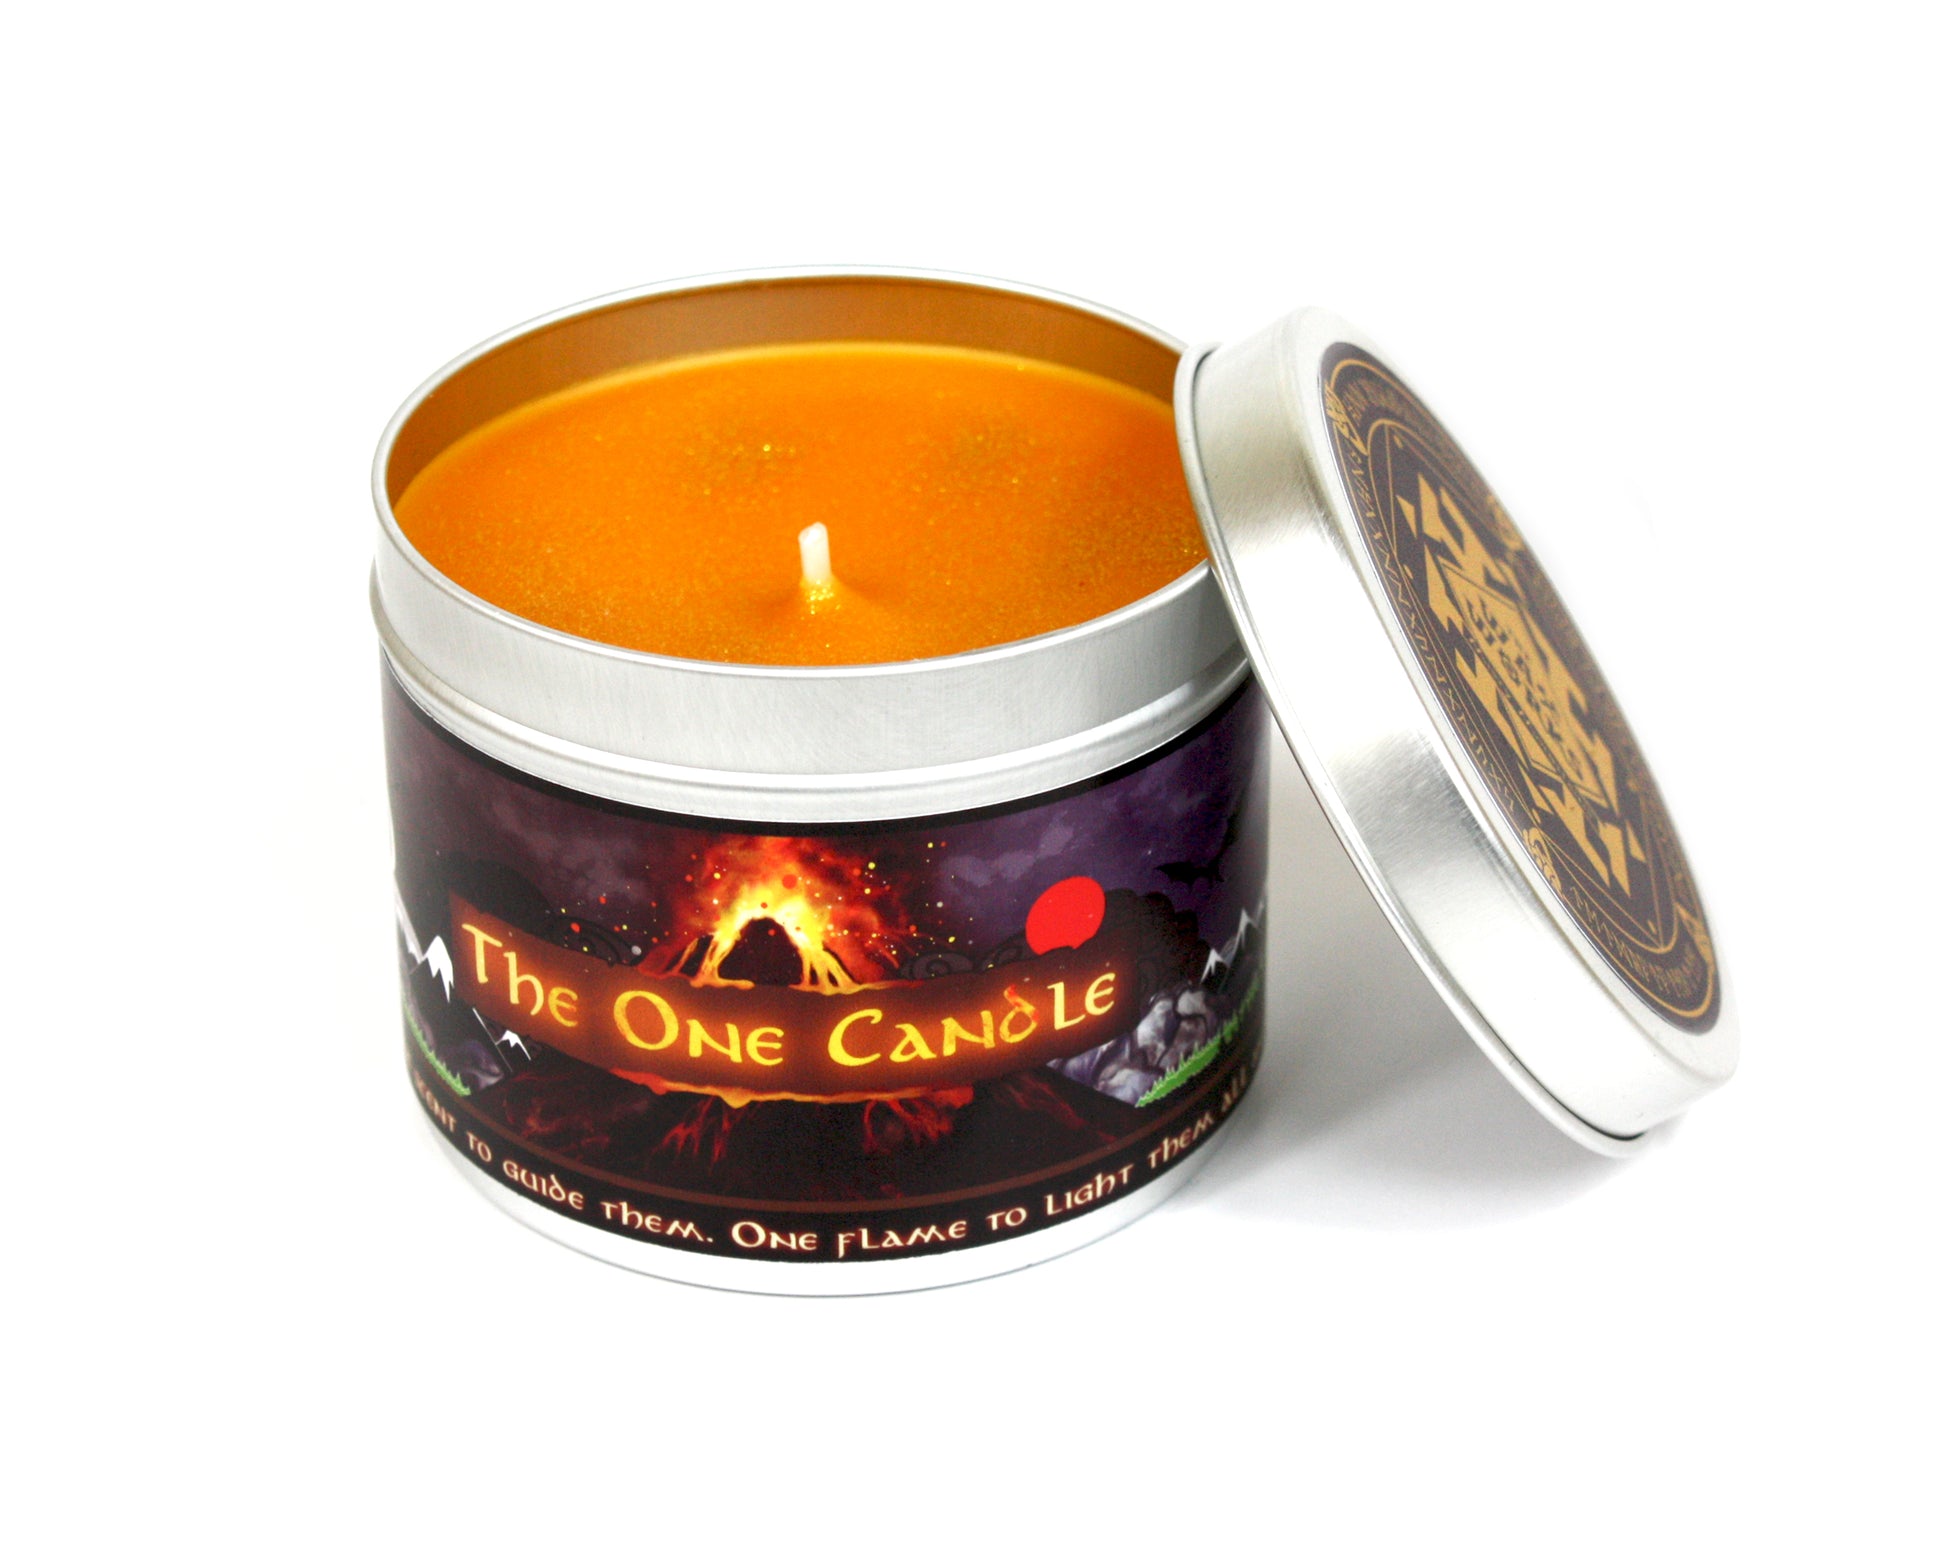 The One Candle with lid off and orange wax